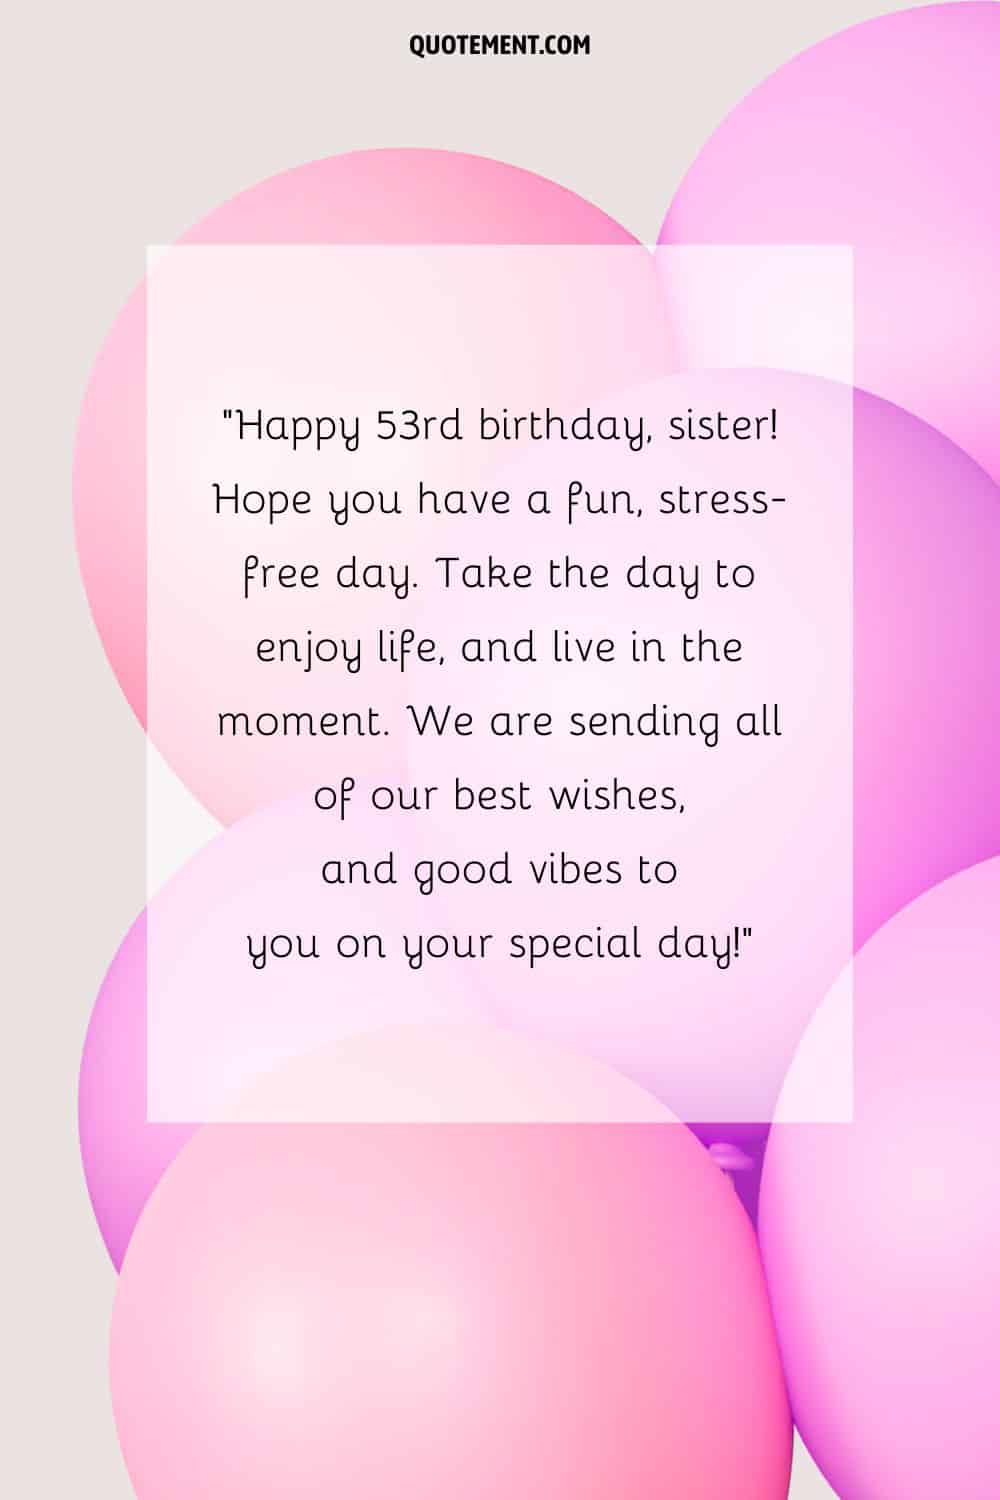 Lovely message for a sister that turns 53 and pink and purple balloons in the background